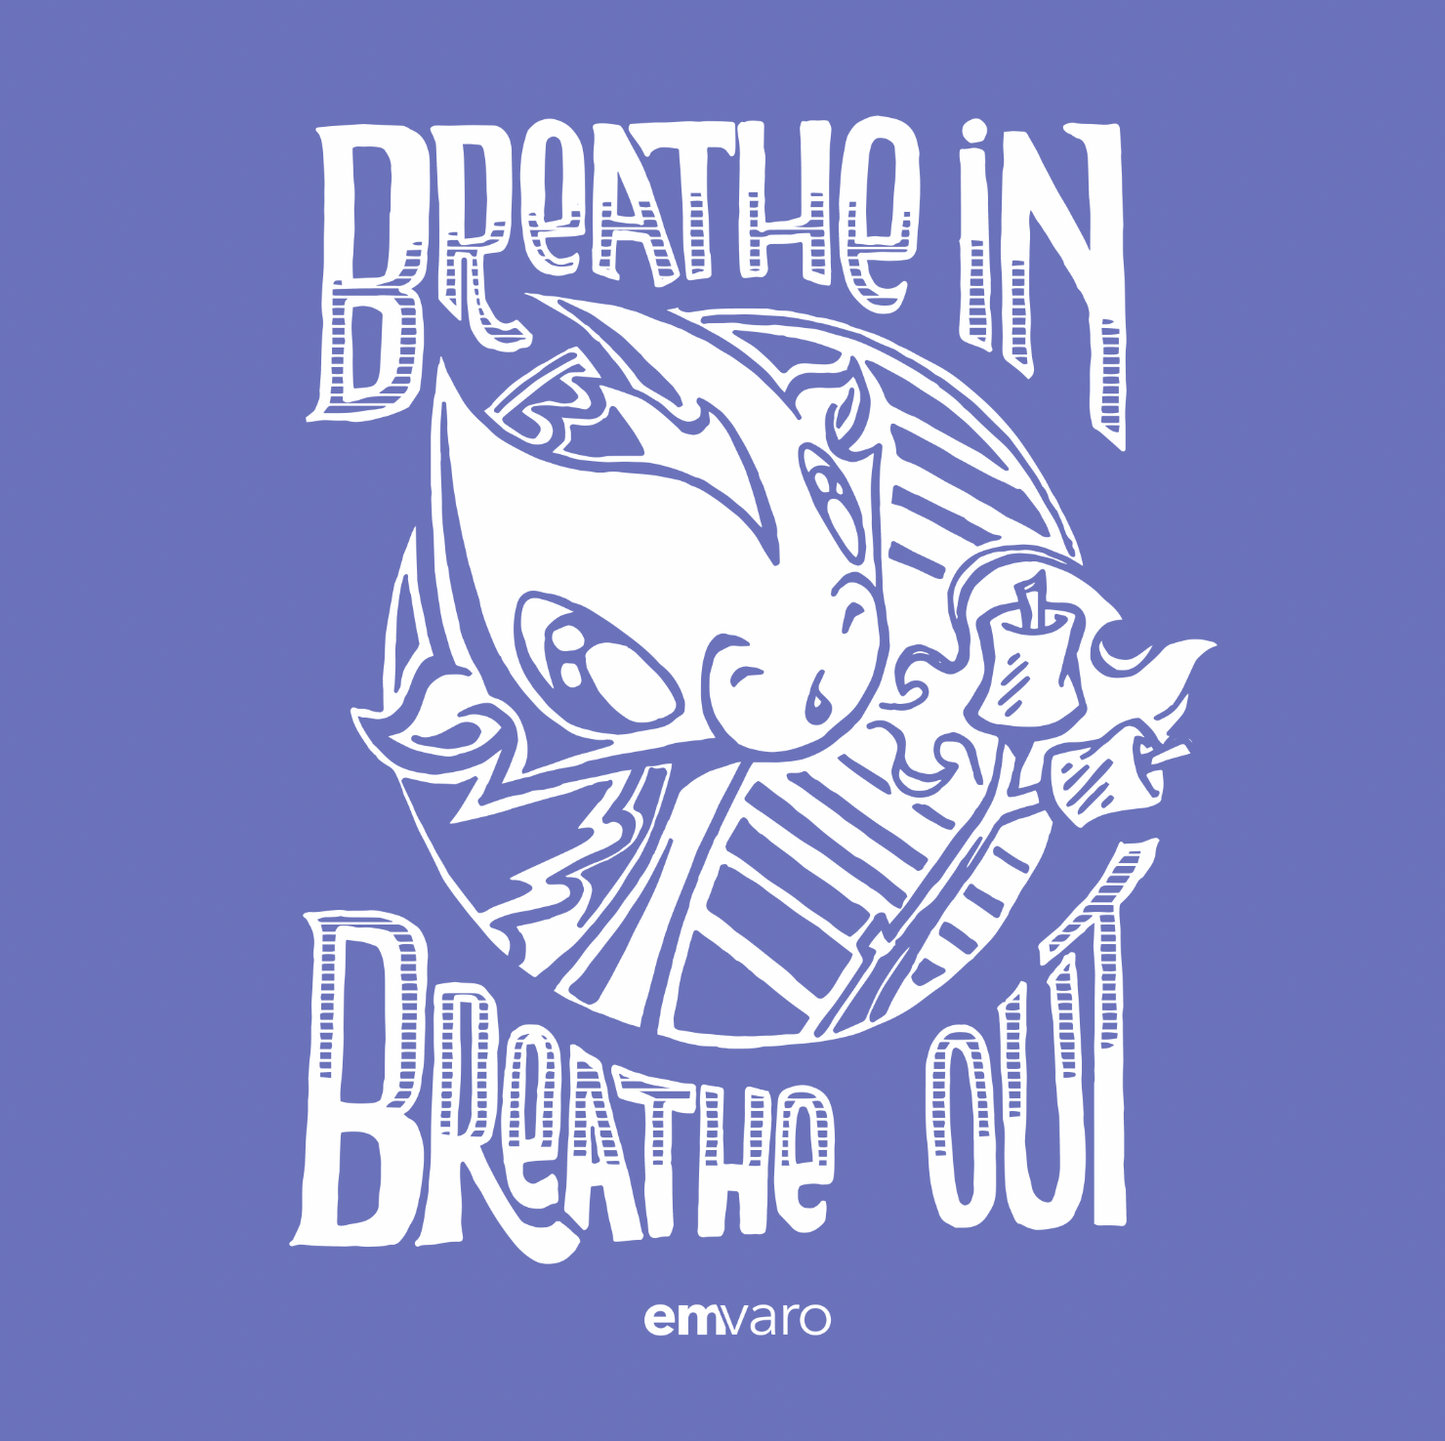 T-shirt: Breathe In, Breathe Out - Wisp the Dragon